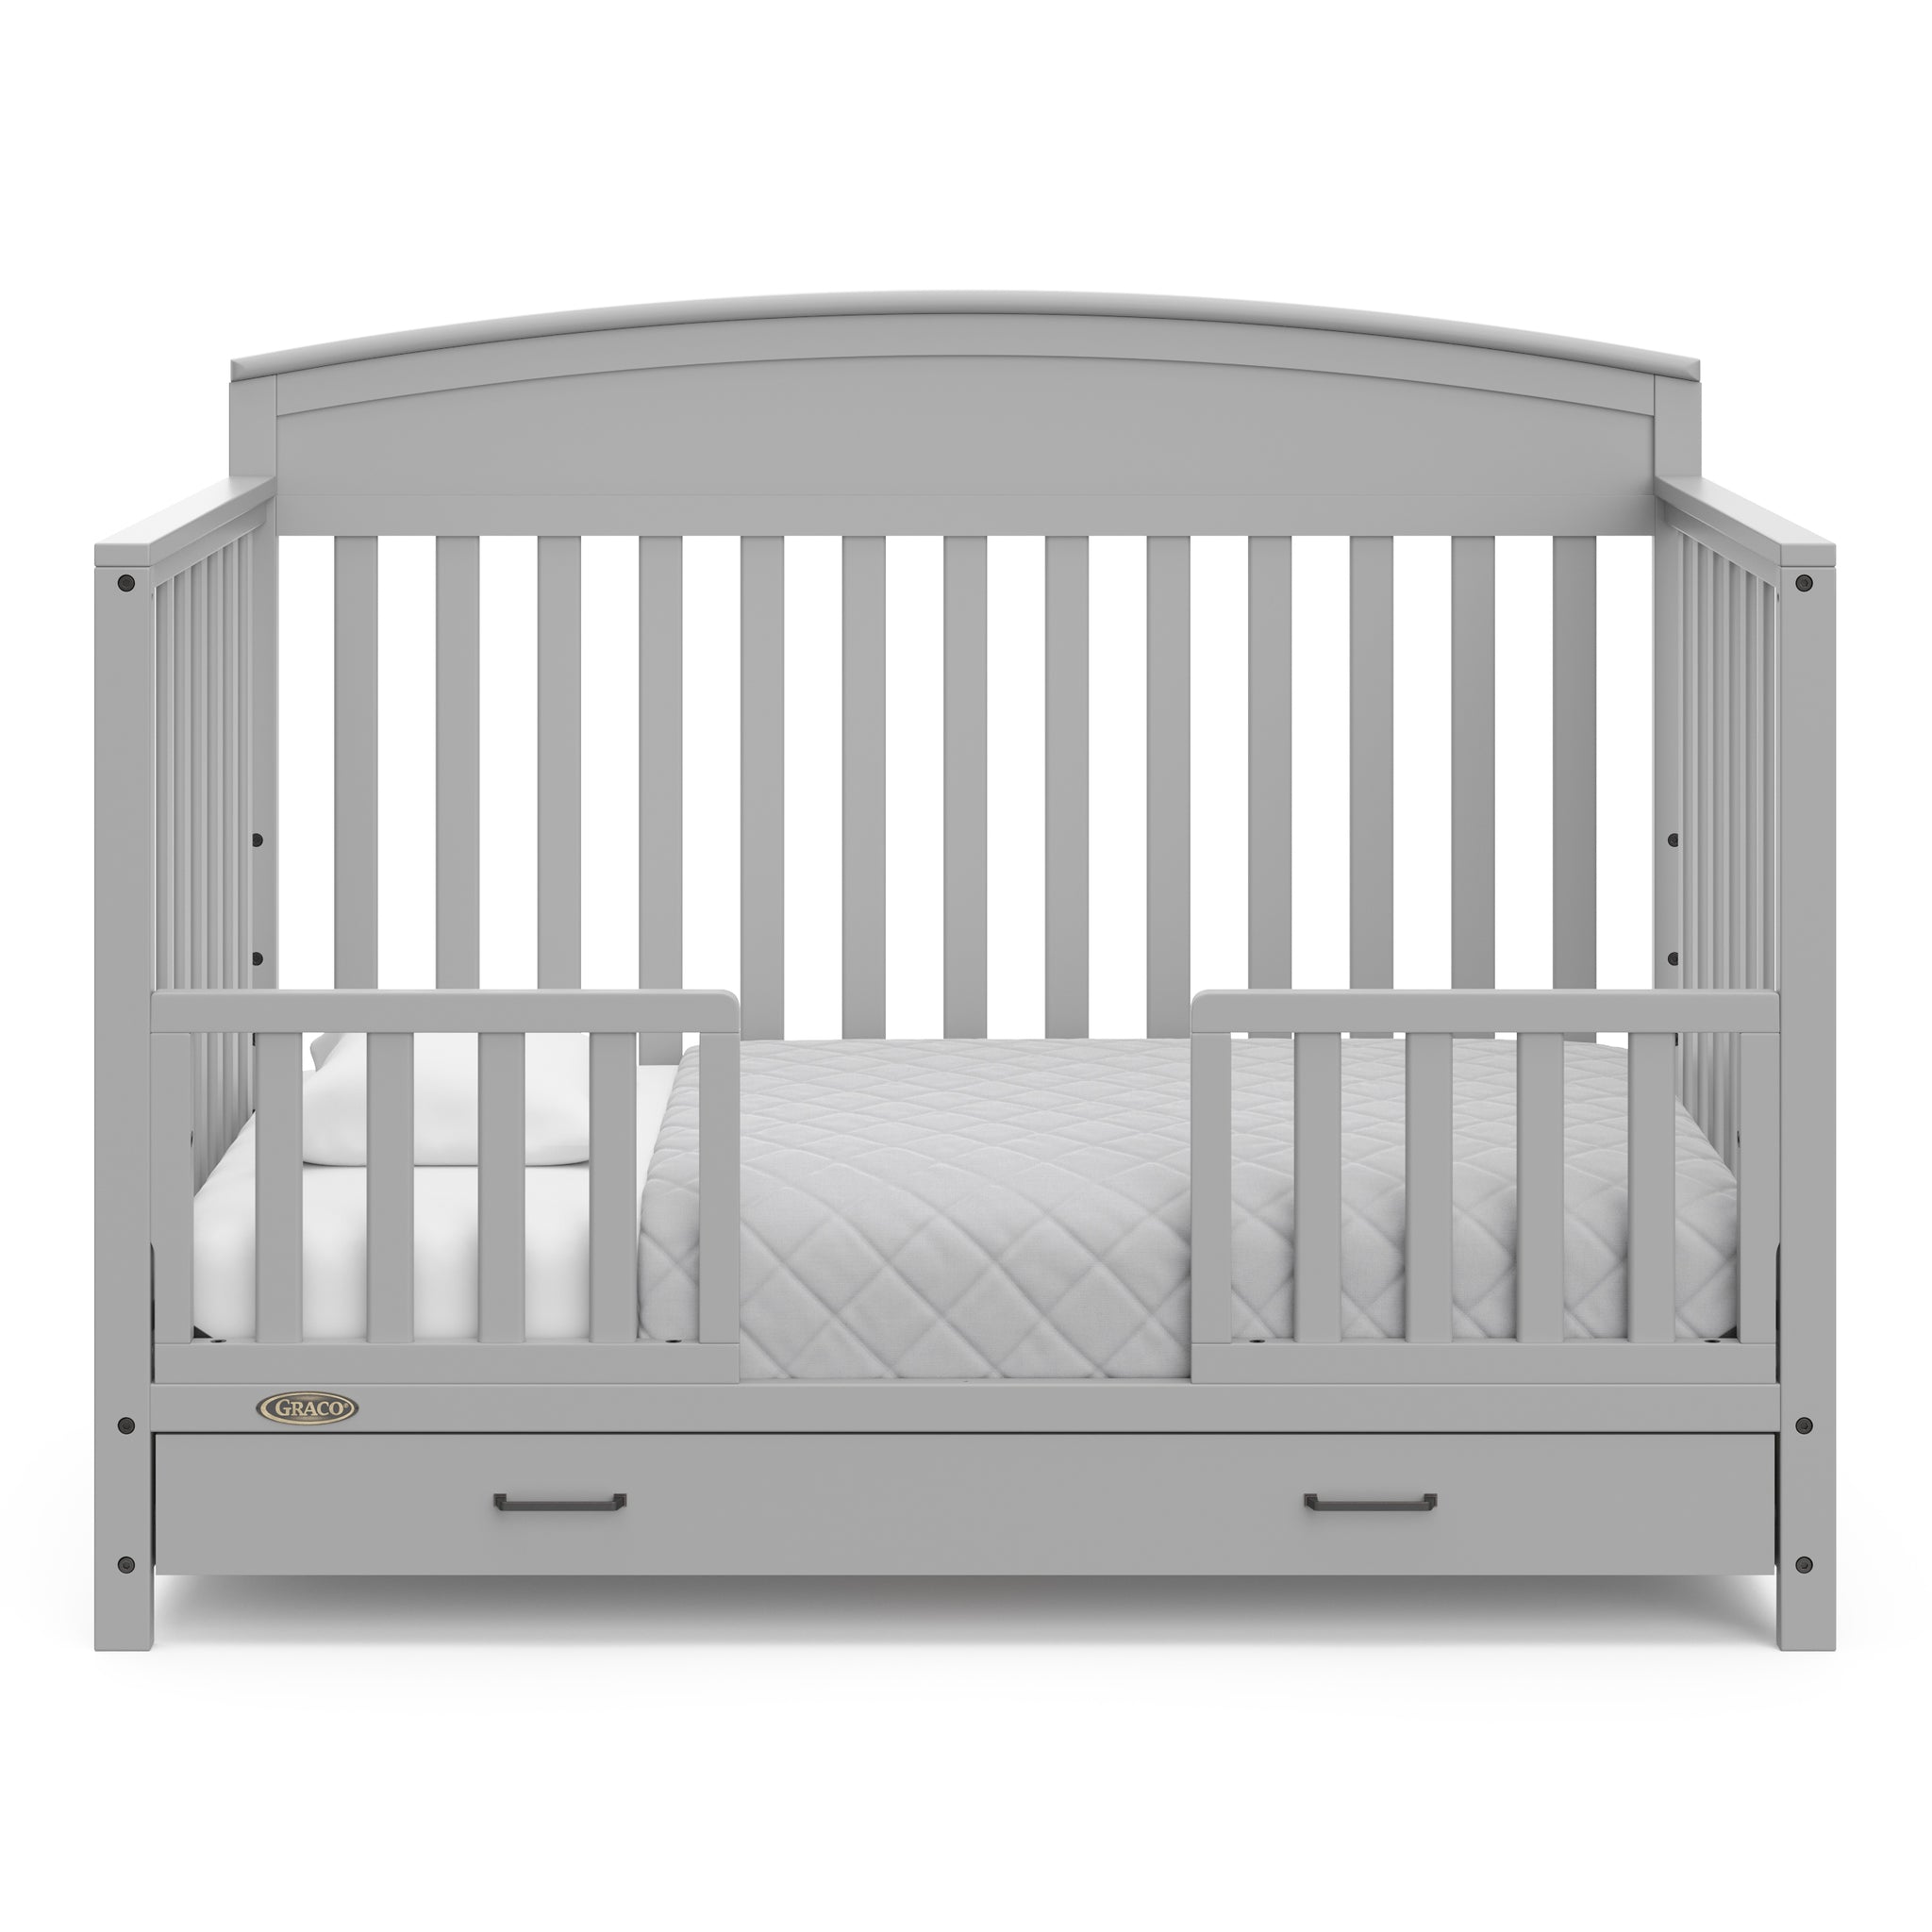 Pebble gray crib with drawer in toddler bed conversion with two safety guardrails